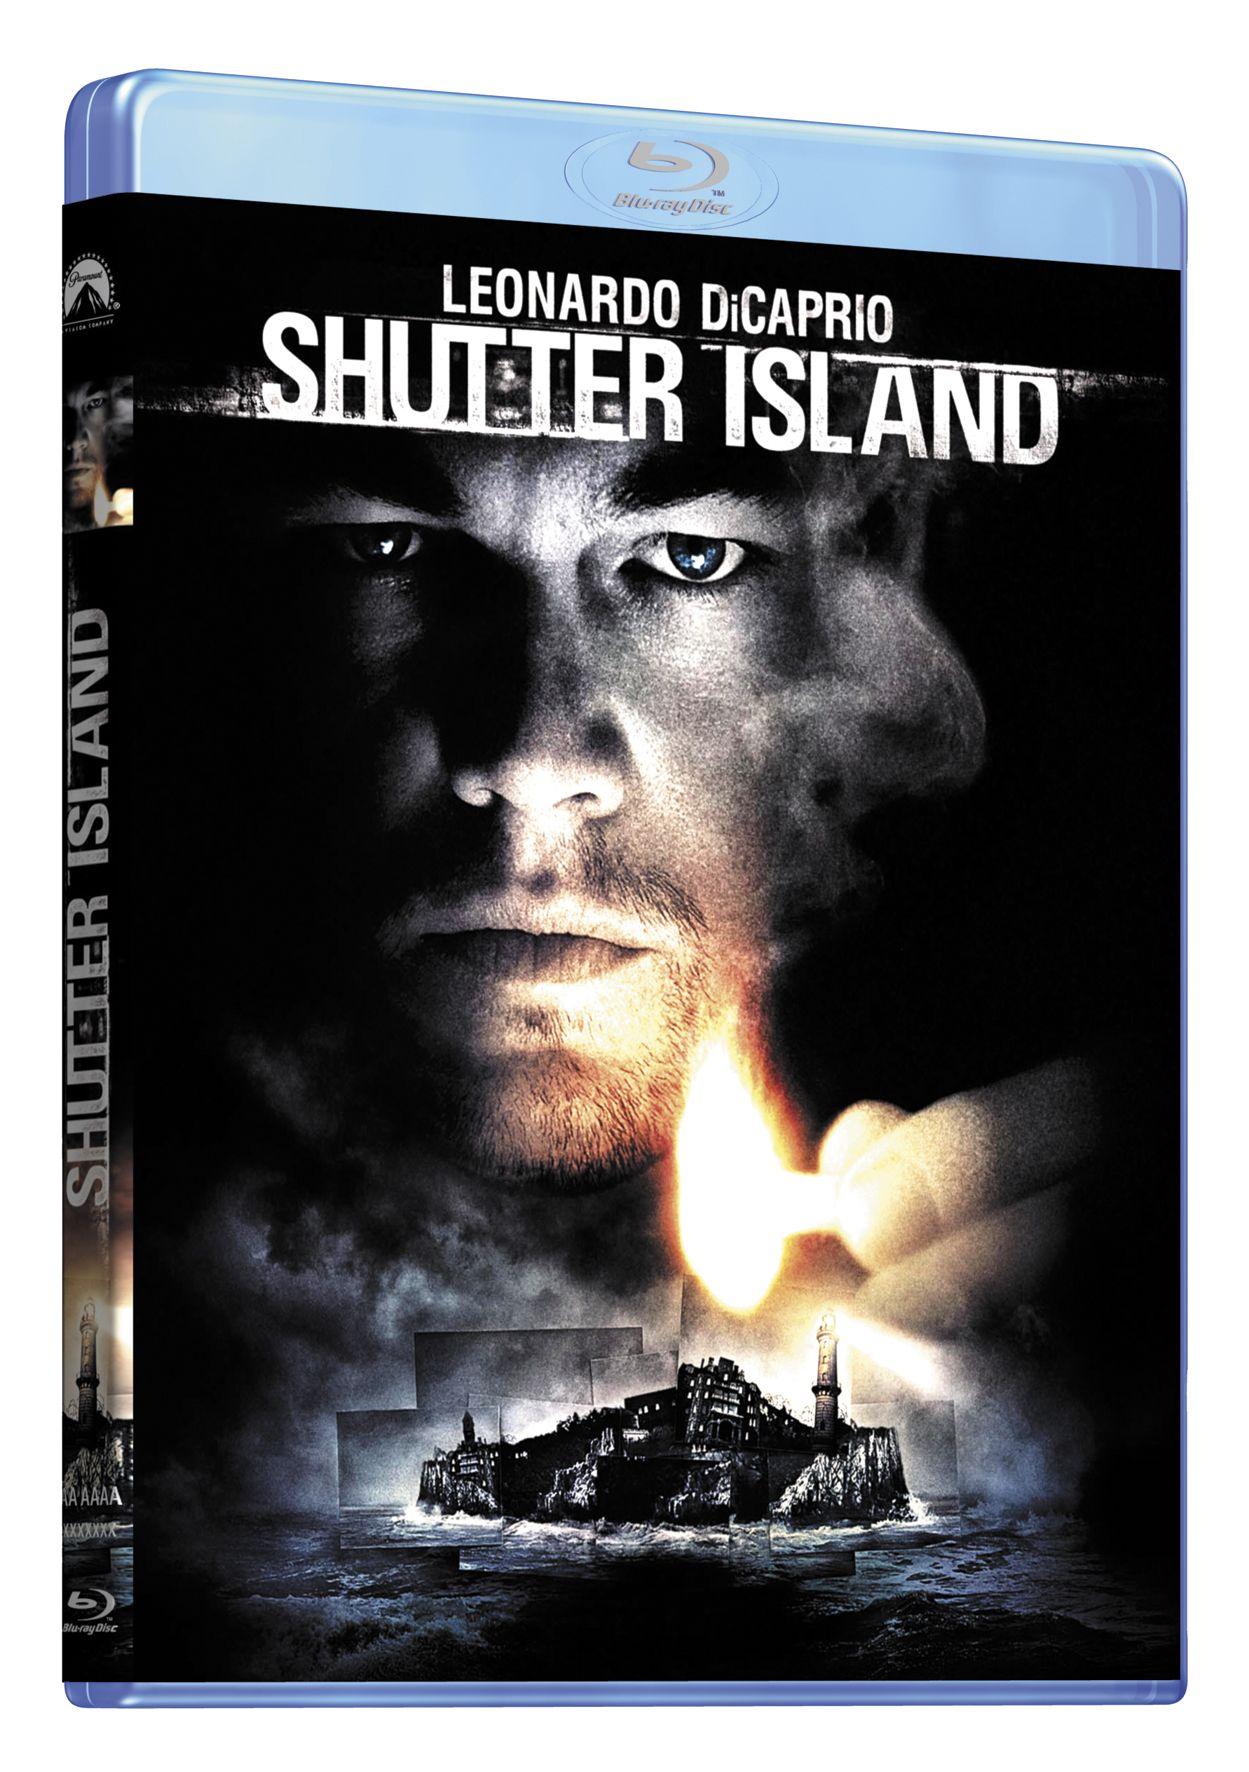 Shutter Island : Blu-ray lumineux pour sombre thriller